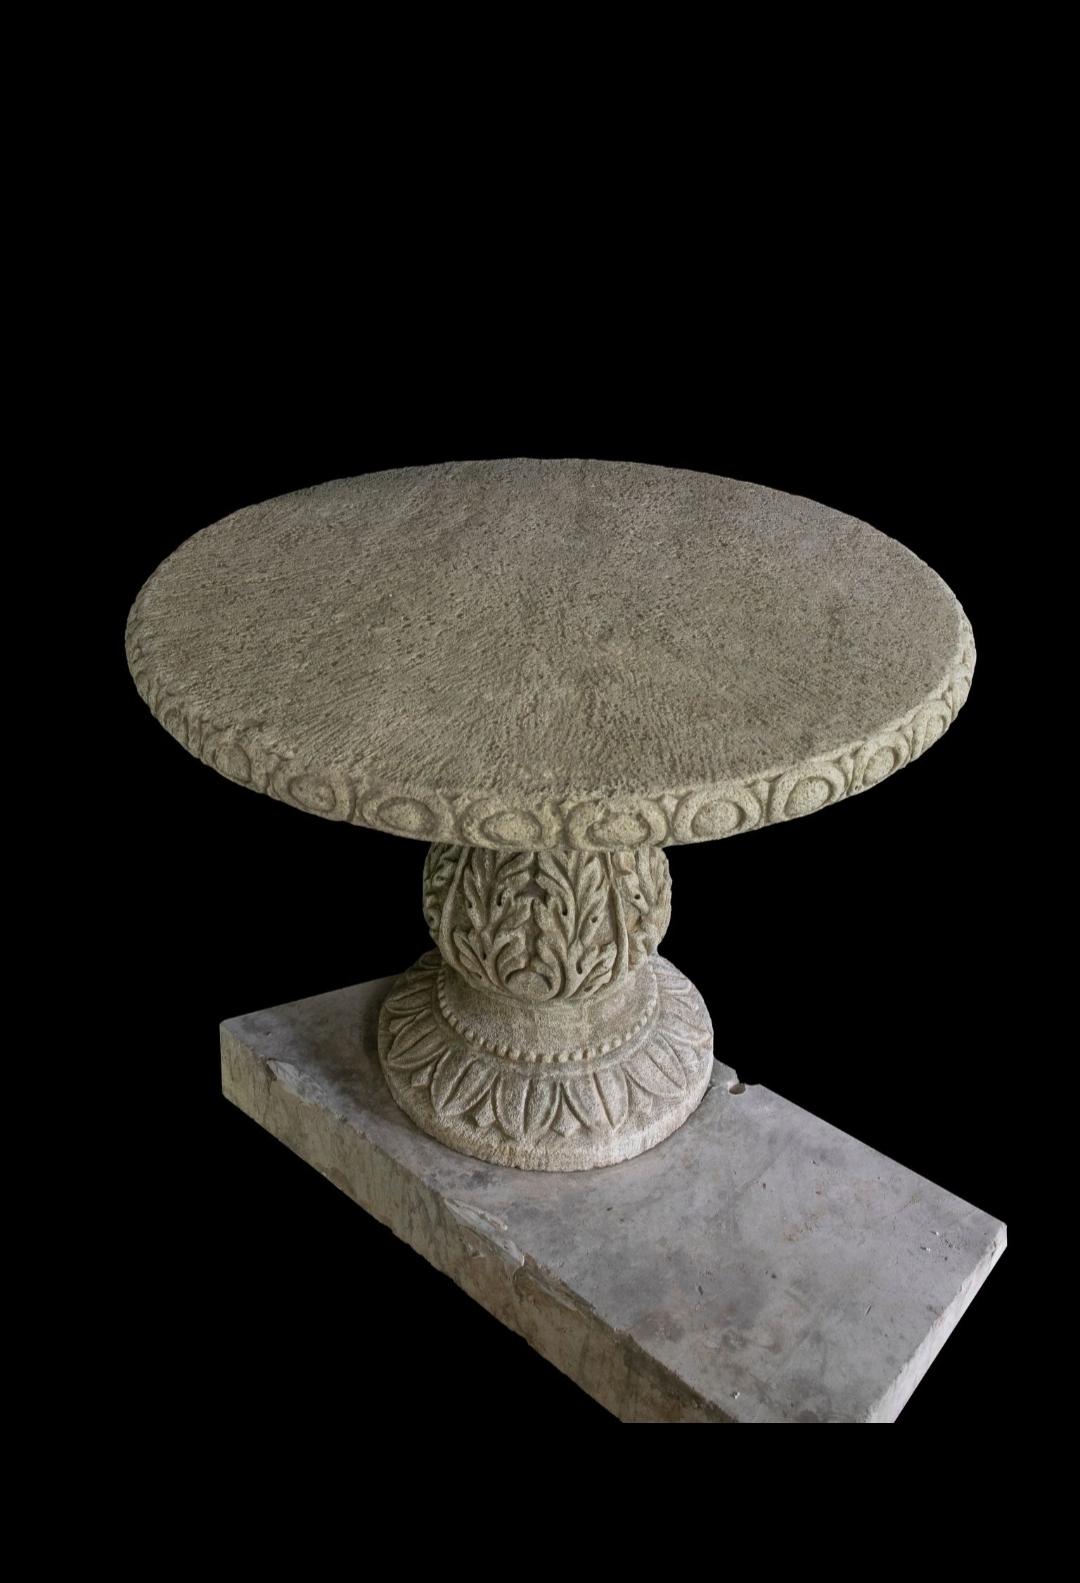 This lovely round table is one of 7 limestone tables that were reclaimed from a 1930's private Italian Villa prior to rennovating. We love the texture, color and distressed patina on this naturally aged beauty. No breaks or cracks are present as